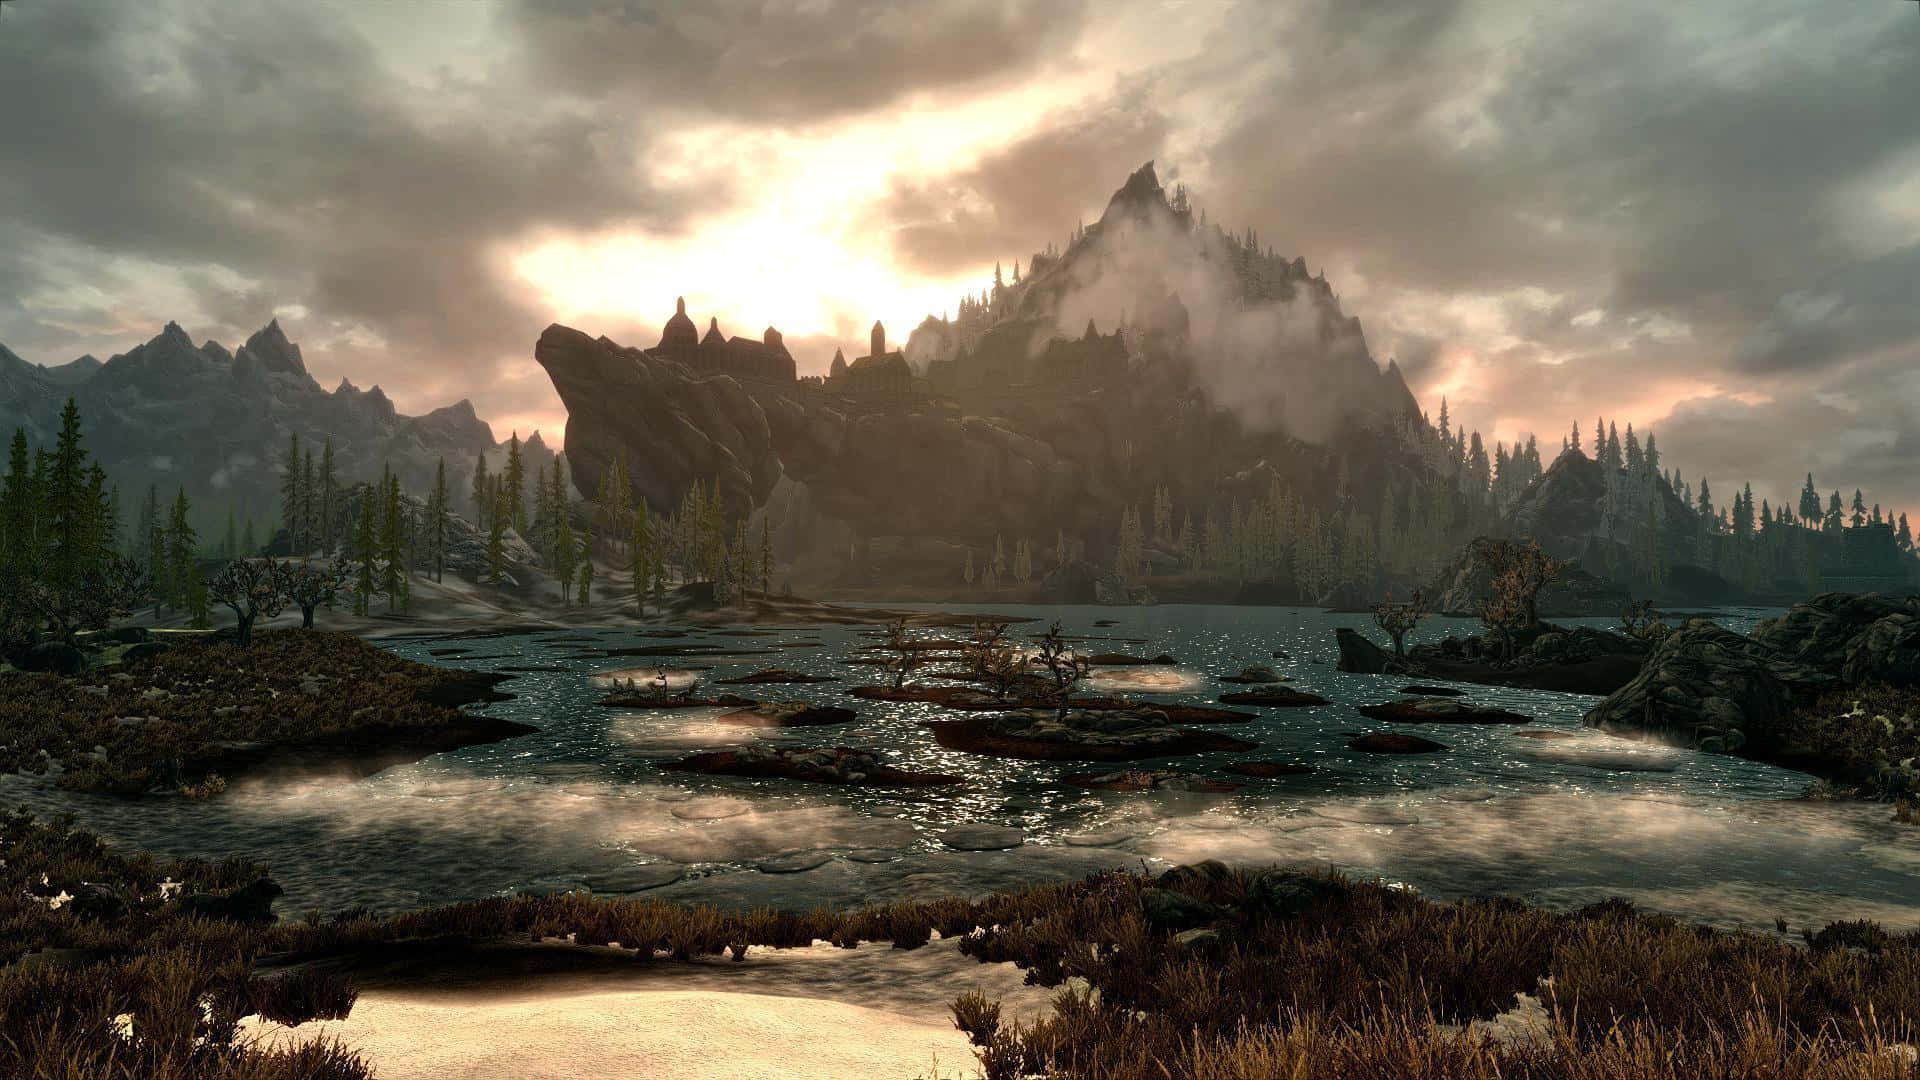 Majestic mountains and serene river in the stunning world of Skyrim Wallpaper